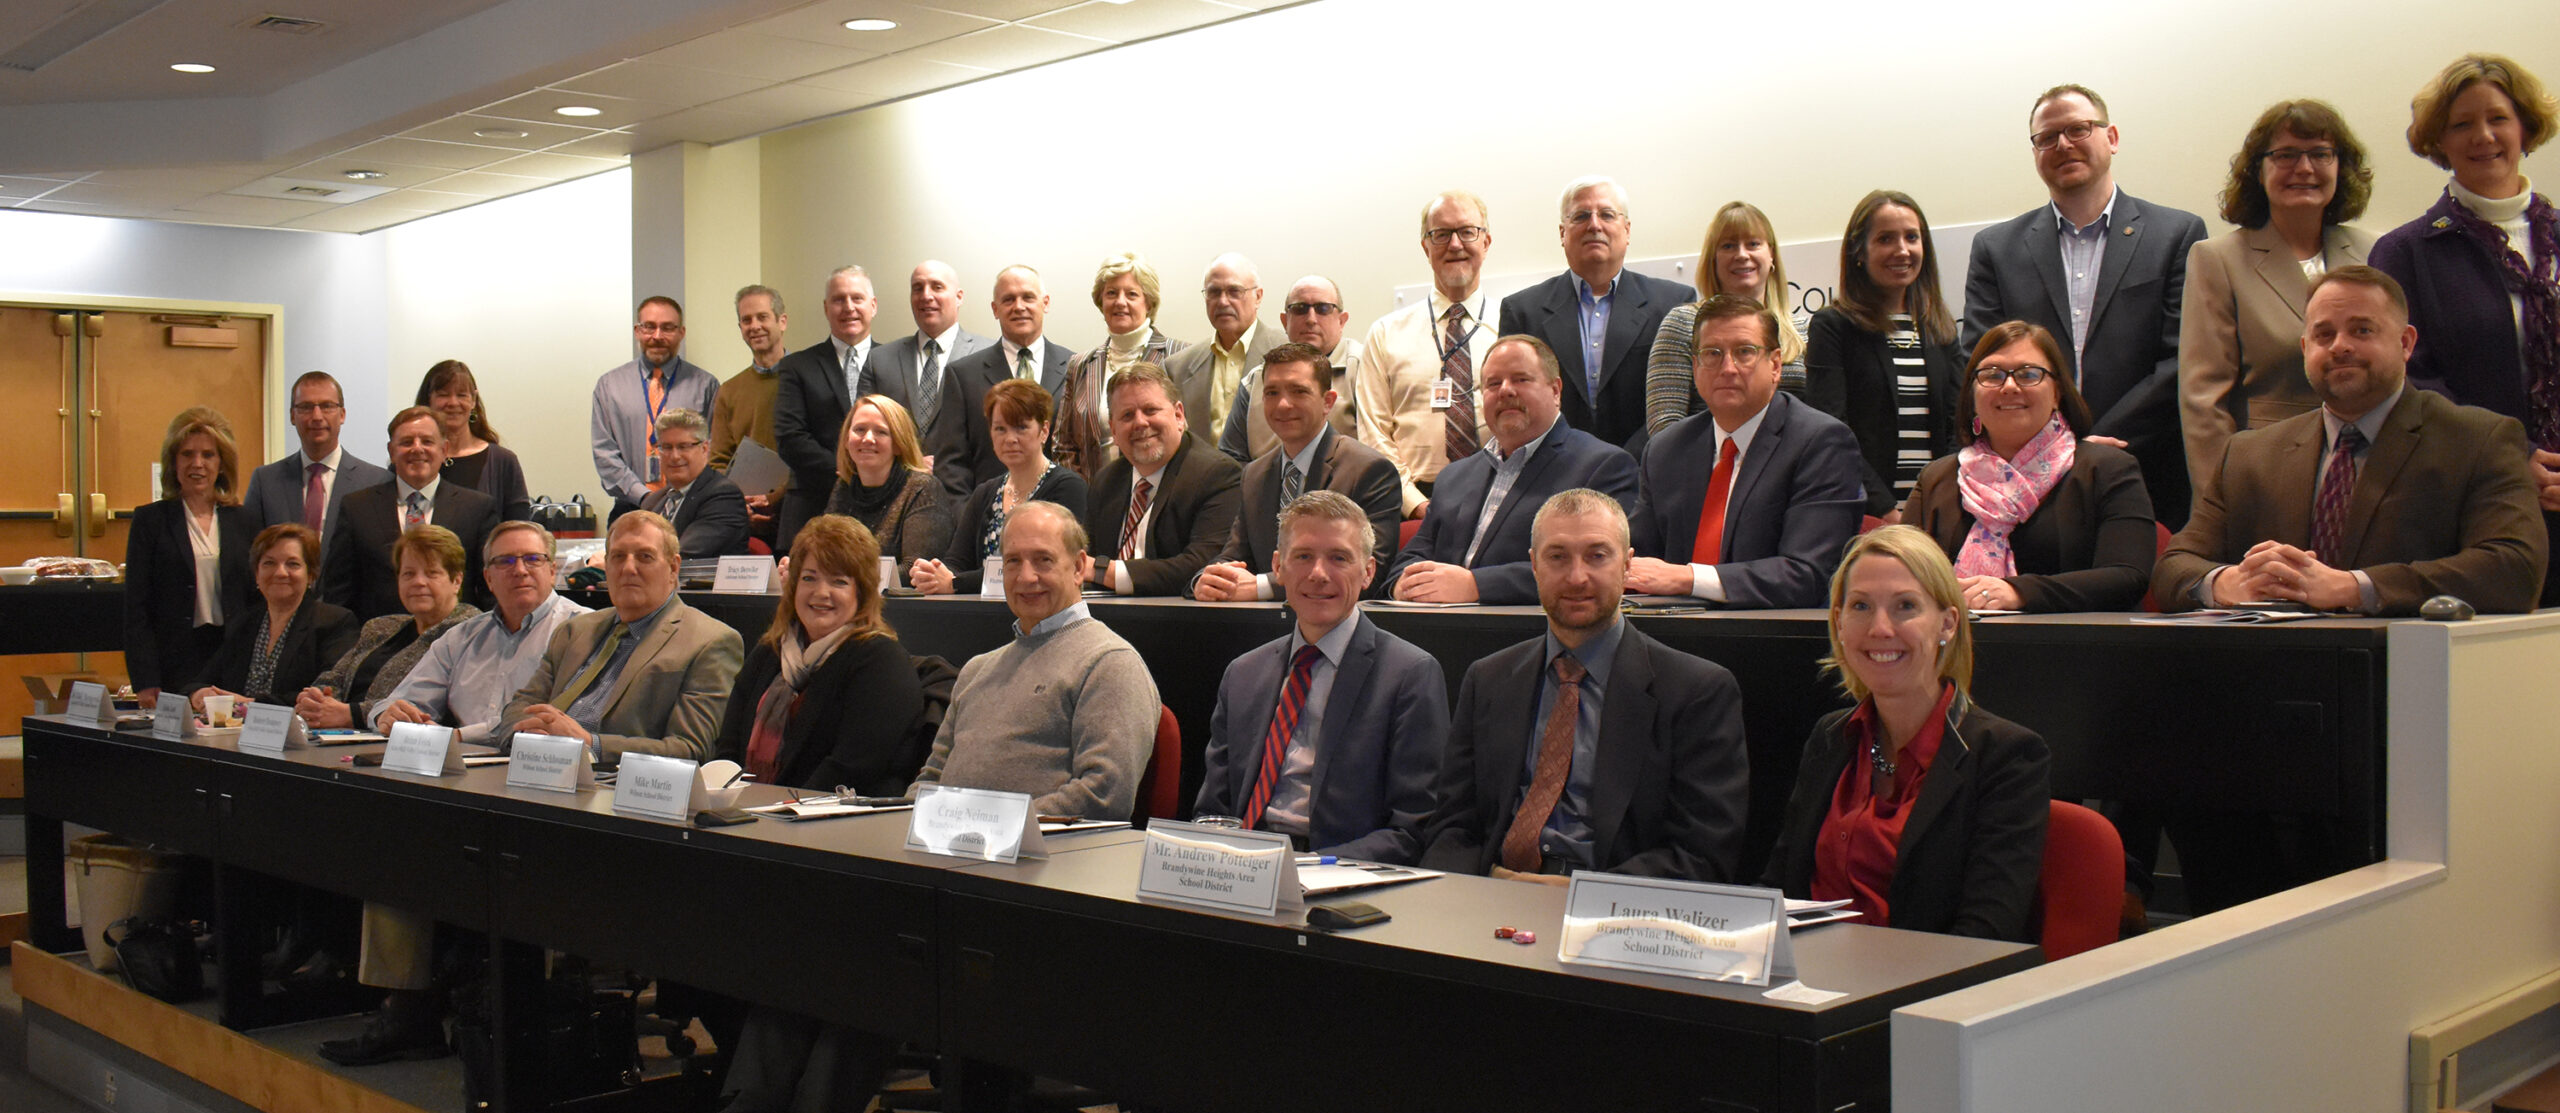 More than 35 education leaders from across Berks County gathered at the BCIU for a group photo after the January 2020 Committee on Legislative Action meeting